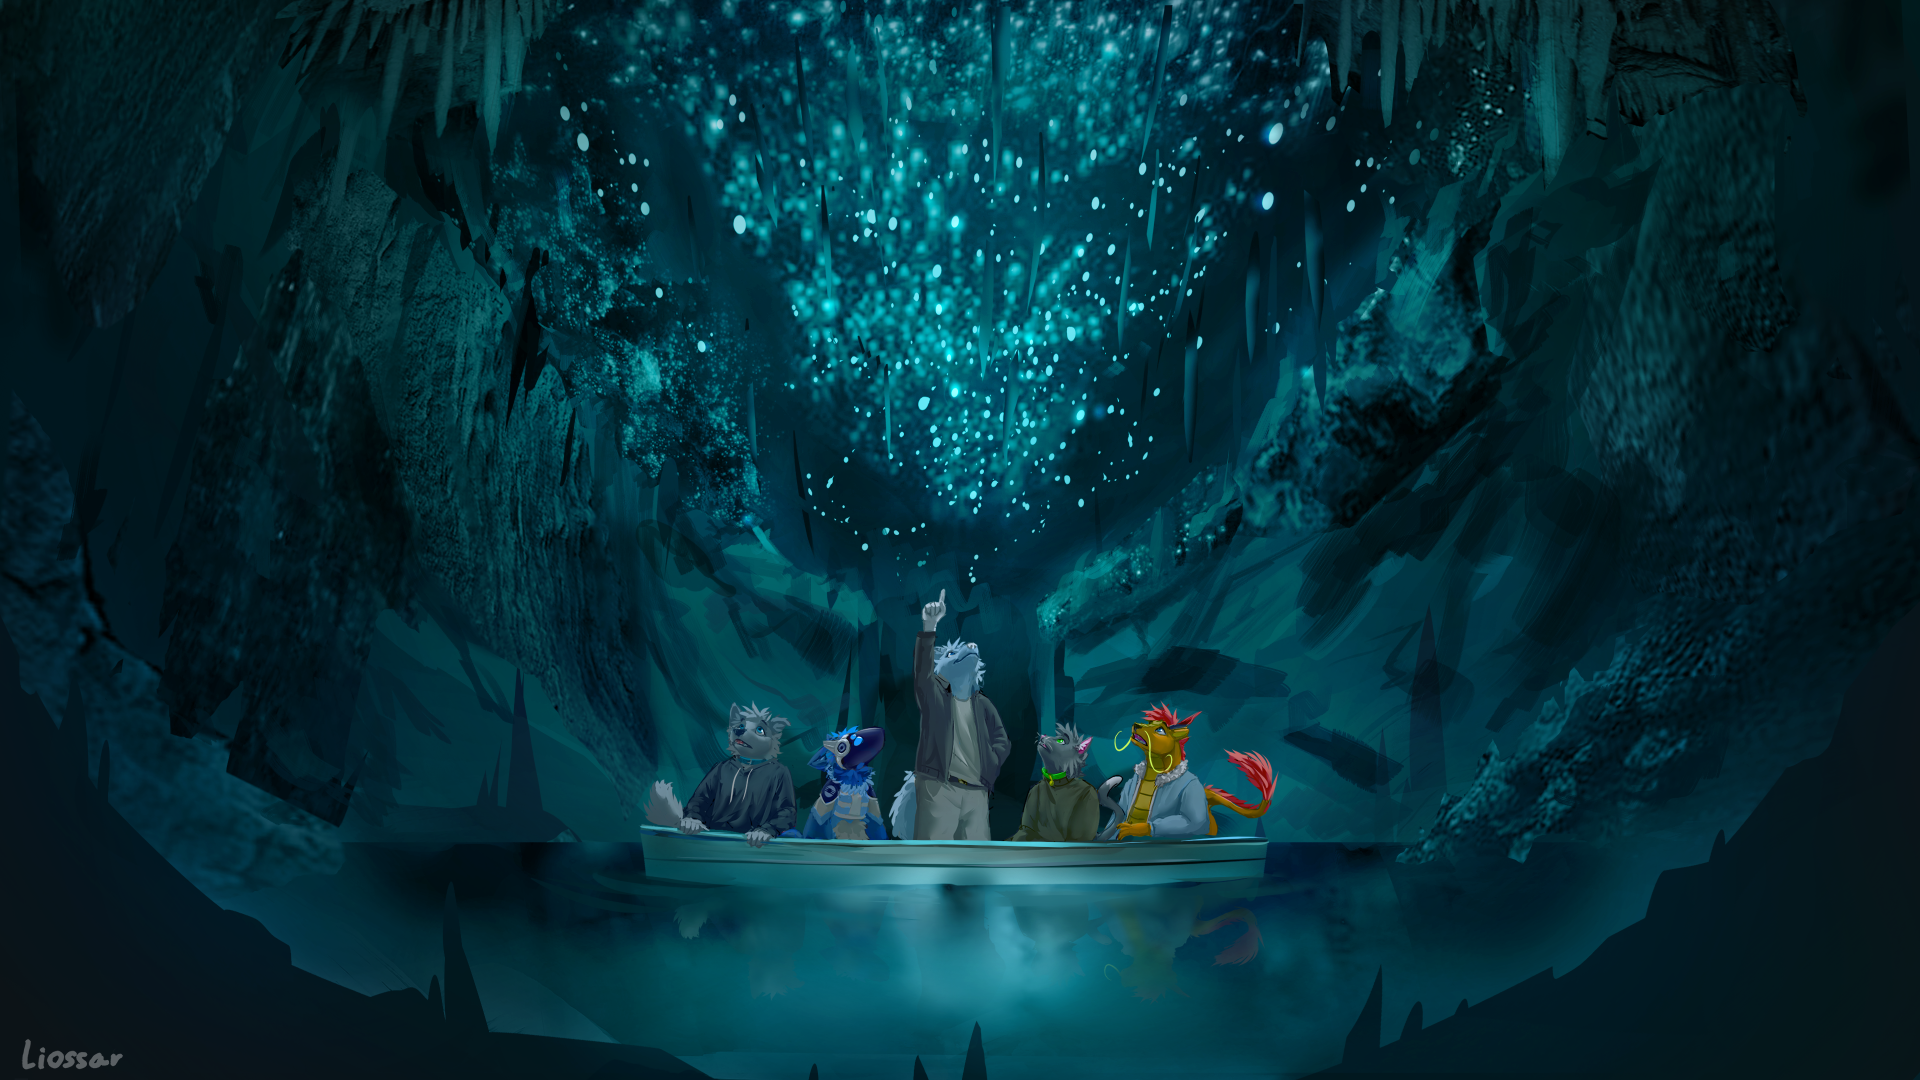 Dan, Cobalt, Frost, Pear and Ziti are in a boat in a glow worm cave. Frost is standing up and pointing to the ceiling, with the others sitting and looking up. Bioluminescent teal light shines from constellations of glowing points on the ceiling above, with rocky cave walls framing the scene.